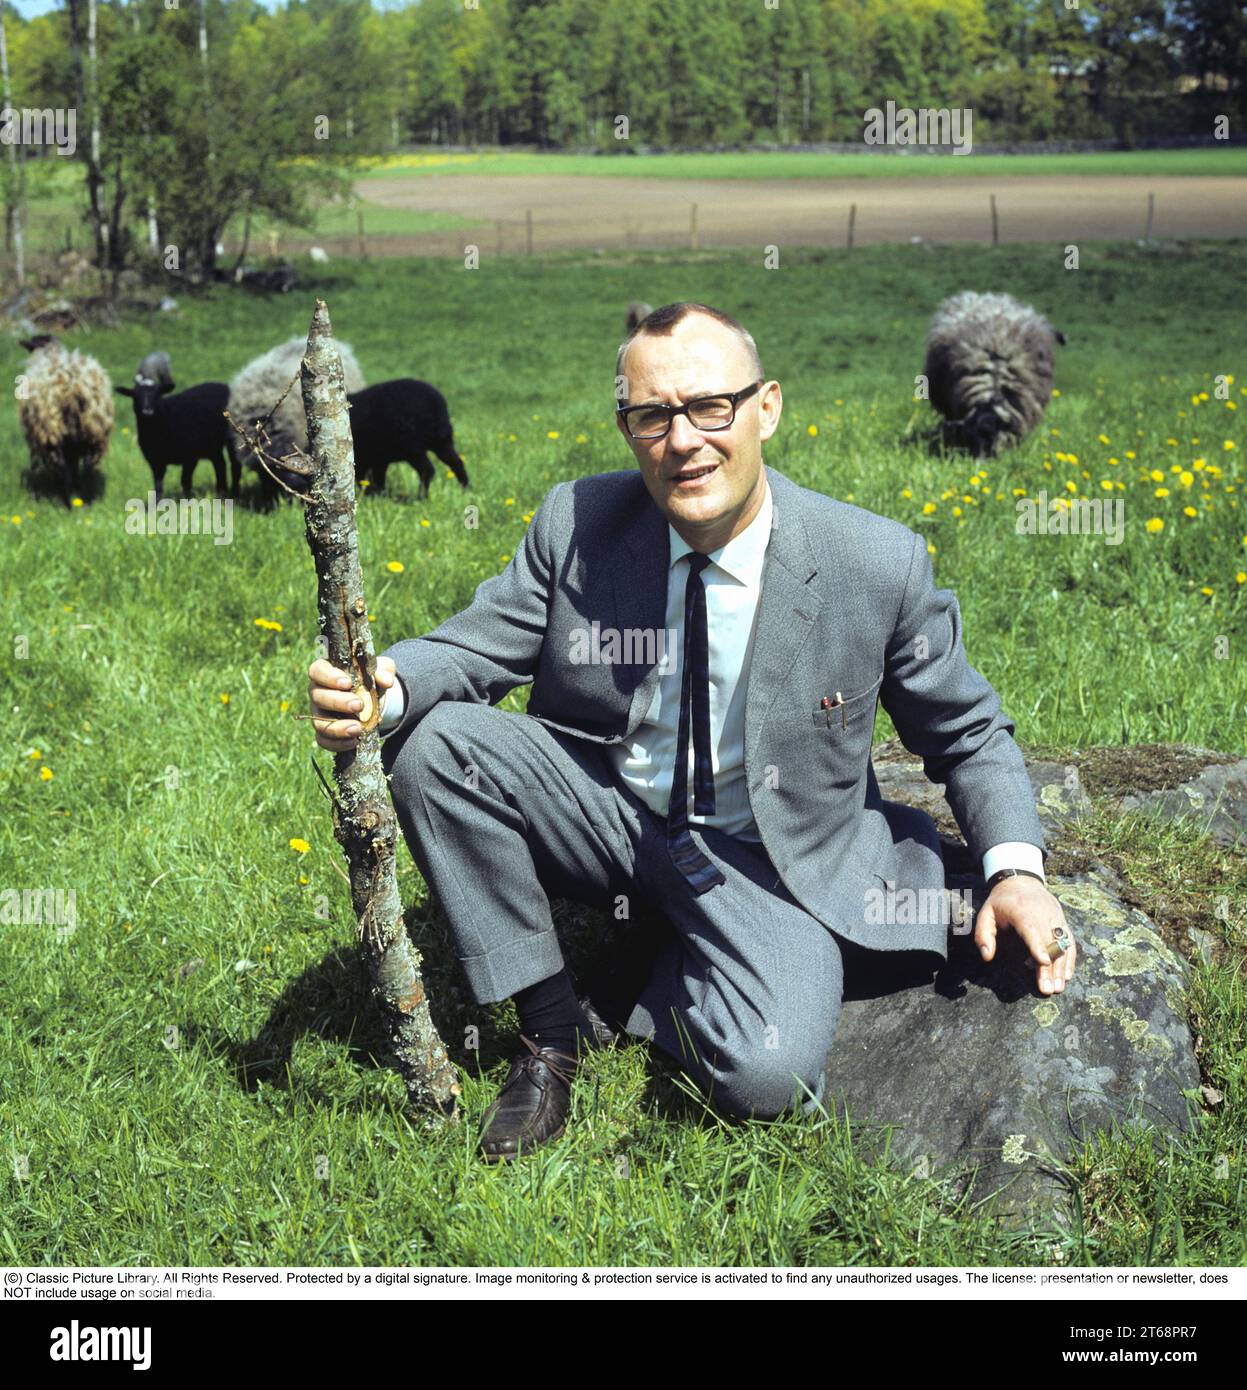 Feodor Ingvar Kamprad. 30 March 1926 – 27 January 2018) was a Swedish billionaire business magnate best known for founding IKEA, a multinational retail company specialising in furniture. Pictured outside his home town of Älmhult Småland Sweden 1968. Roland Palm ref 2-11-1 Stock Photo